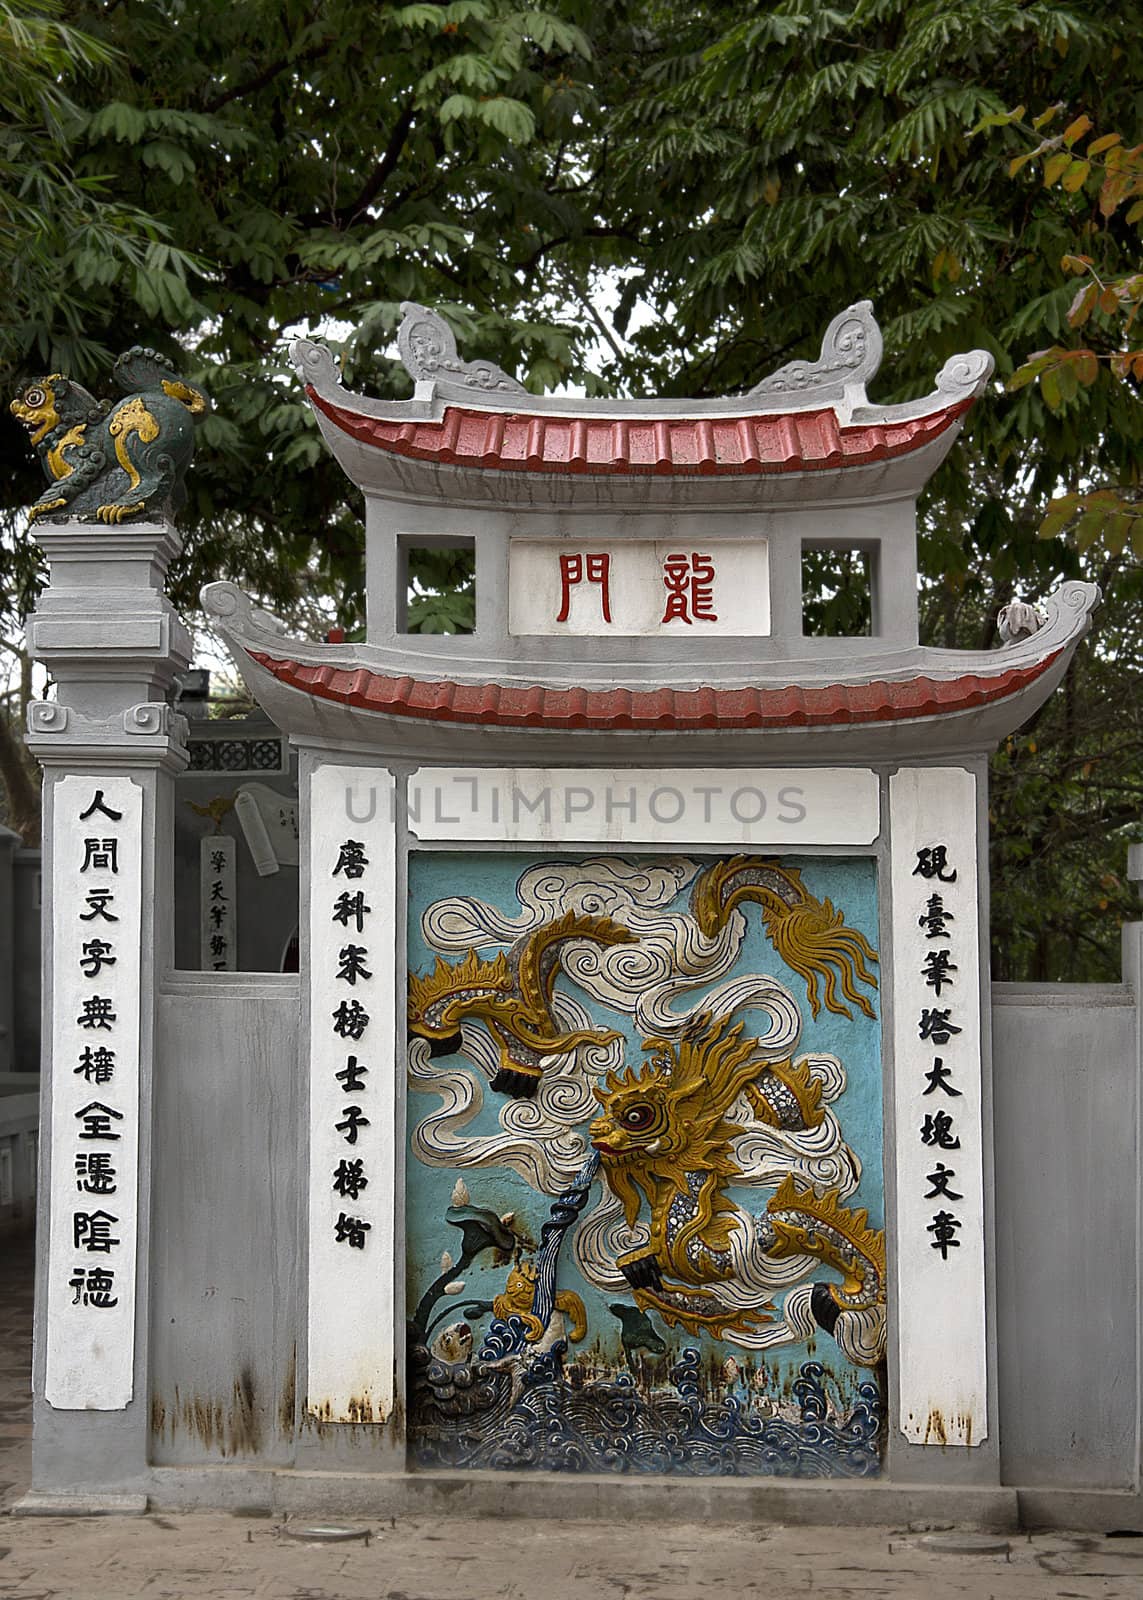 Chinese script and yellow azure image on grey gate structure.